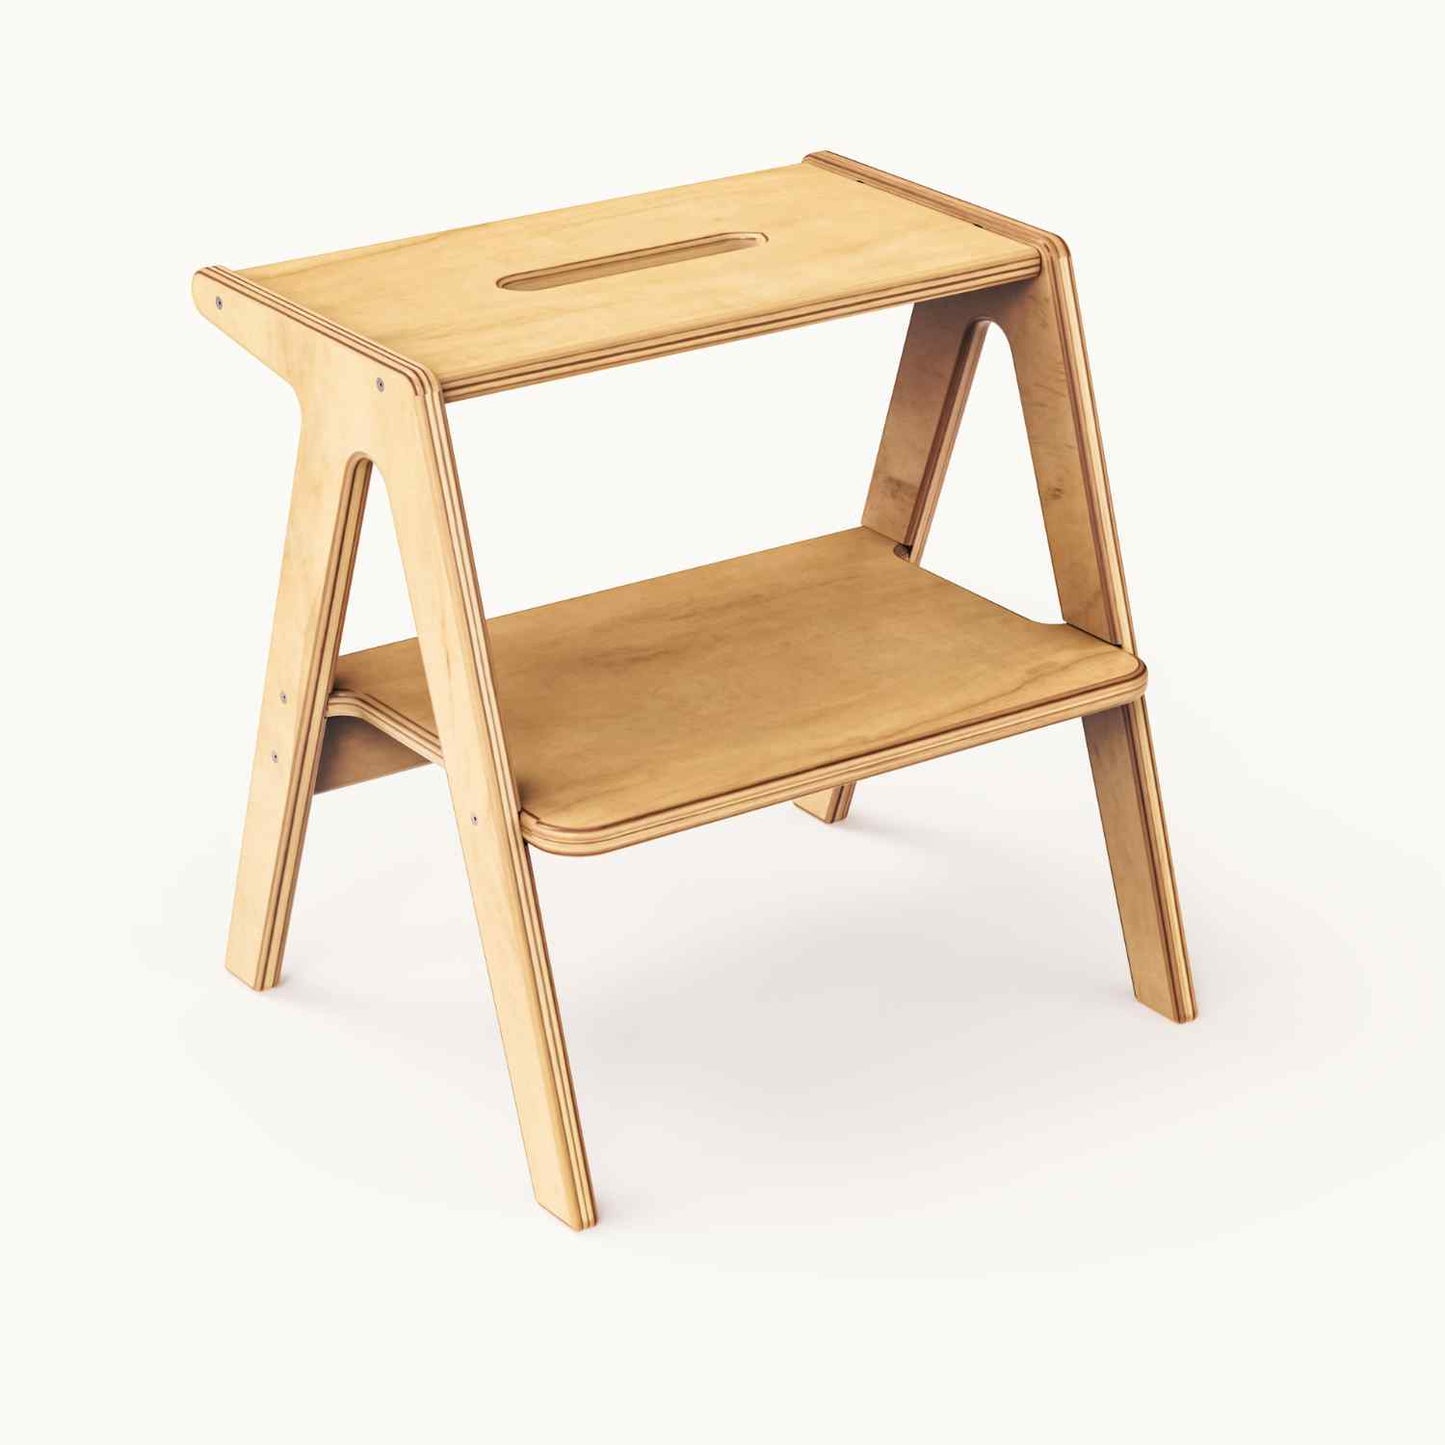 Two Step Stool